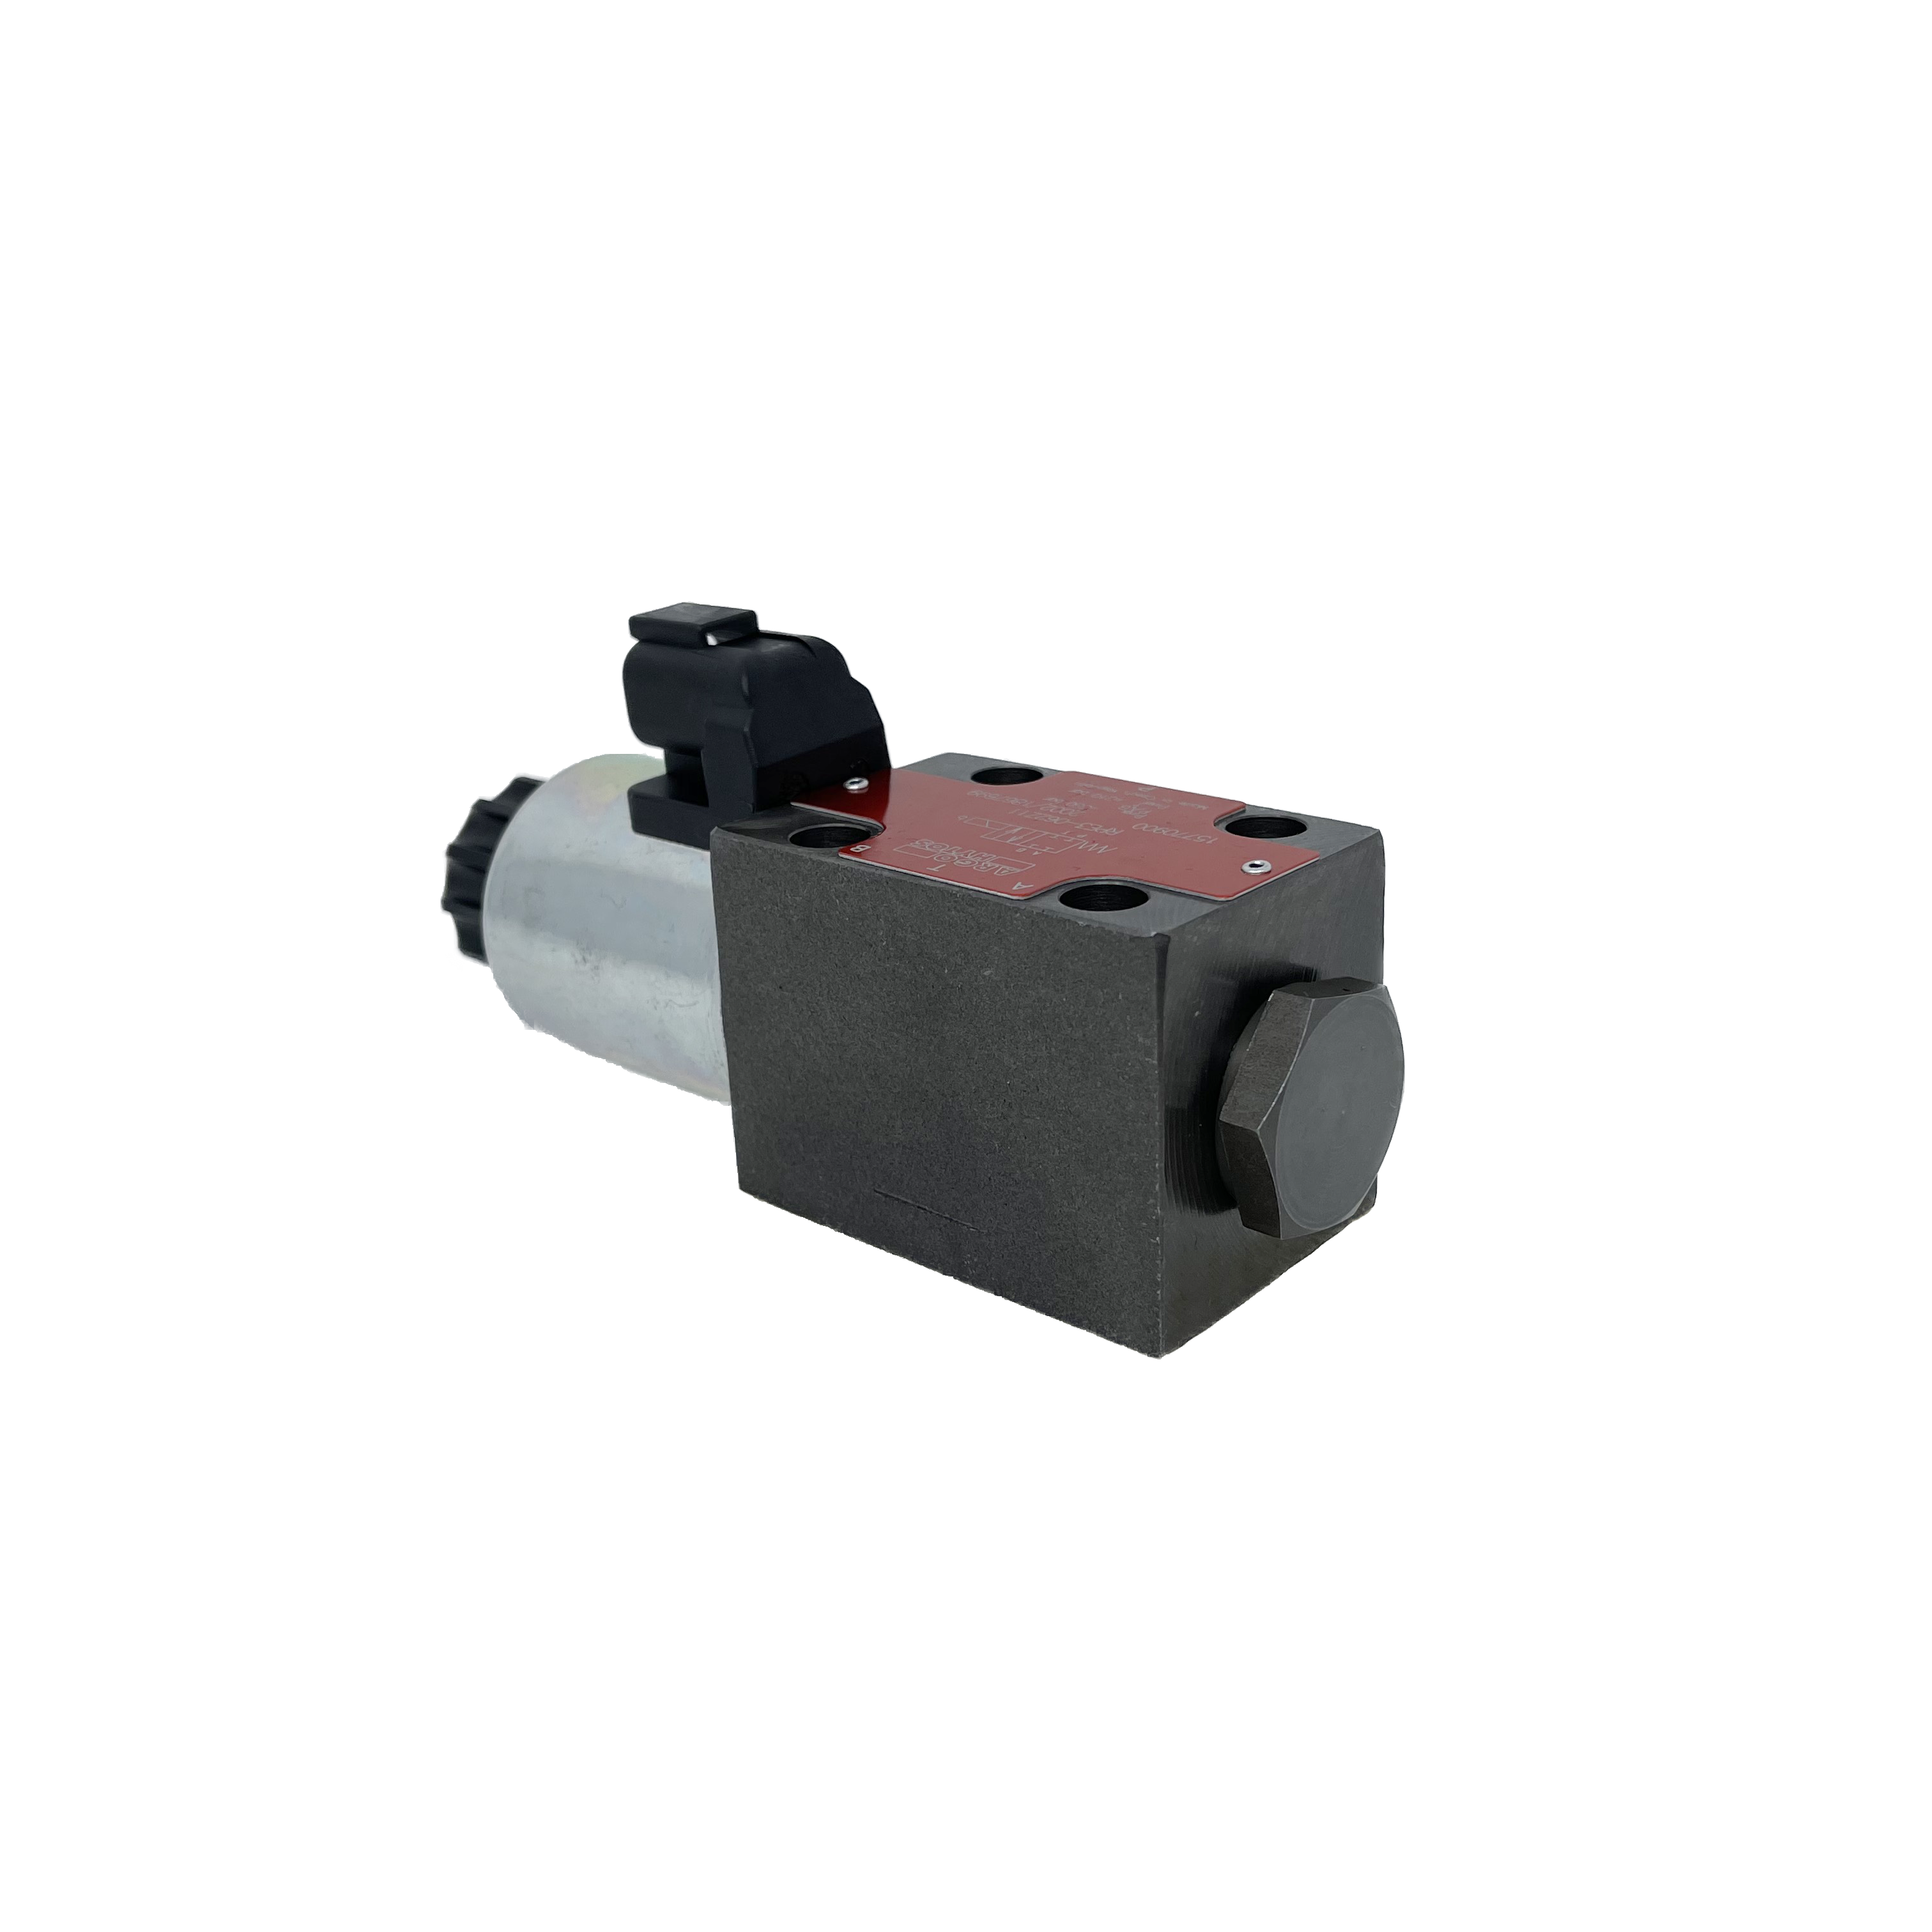 RPE3-062H11/01200E12A : Argo Hytos Directional Control Valve, D03 (NG6), 21GPM, 5100psi, 2P4W, 12 VDC, Deutsch, Spring Return, All Ports Open in Neutral, Coil Side B